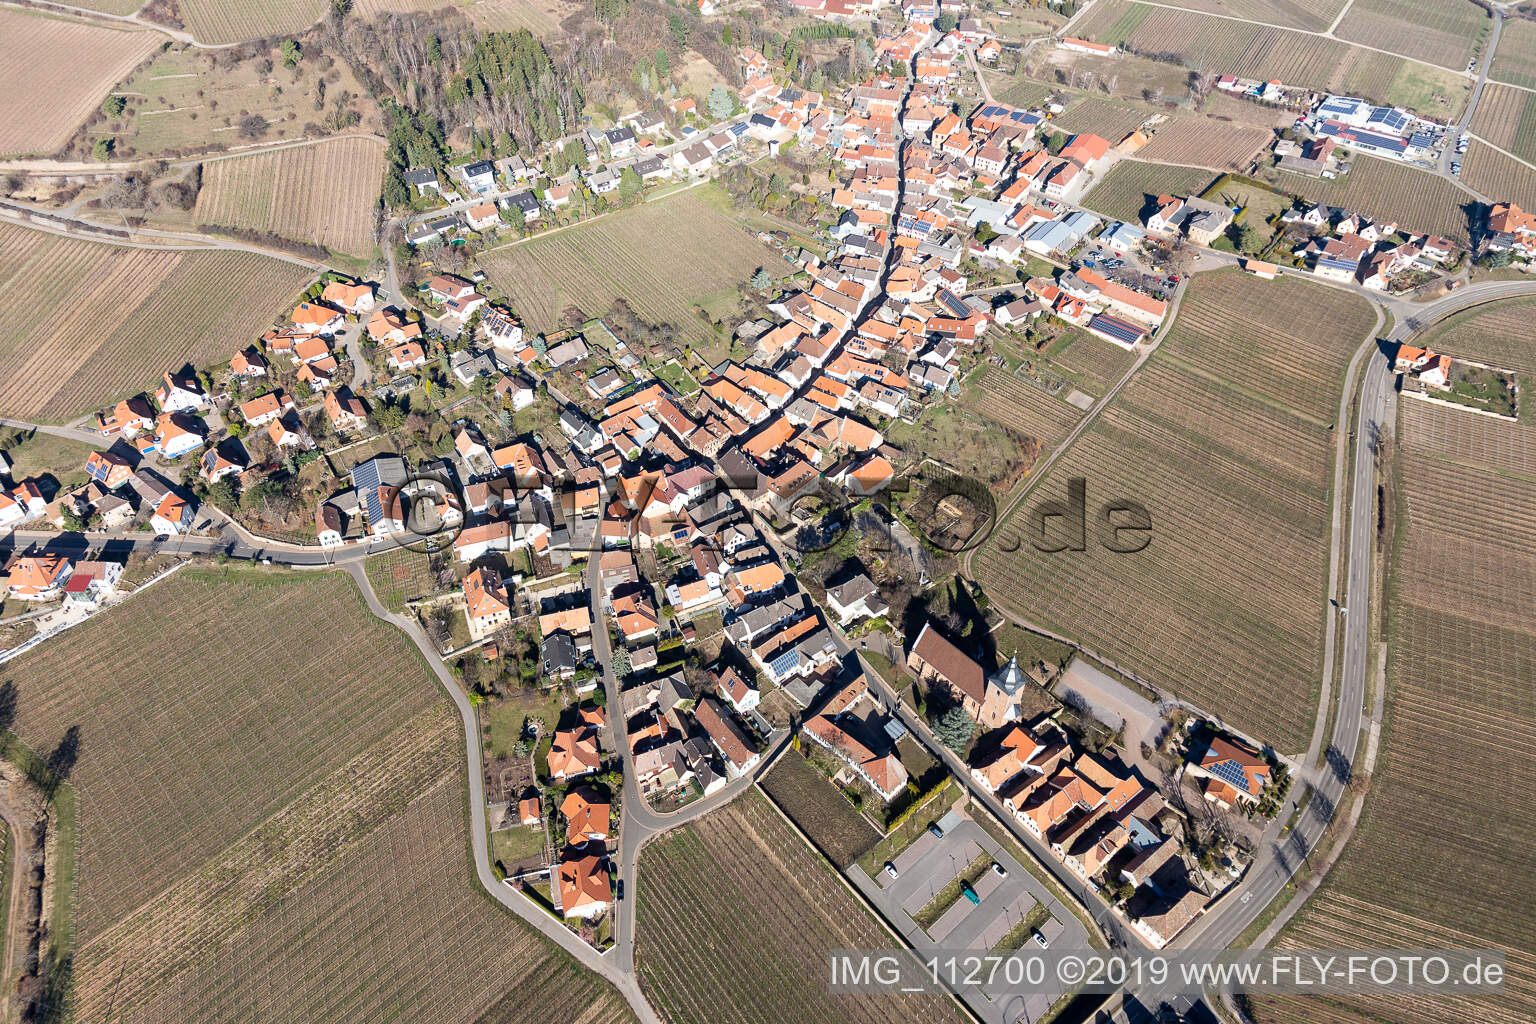 Drone recording of Burrweiler in the state Rhineland-Palatinate, Germany